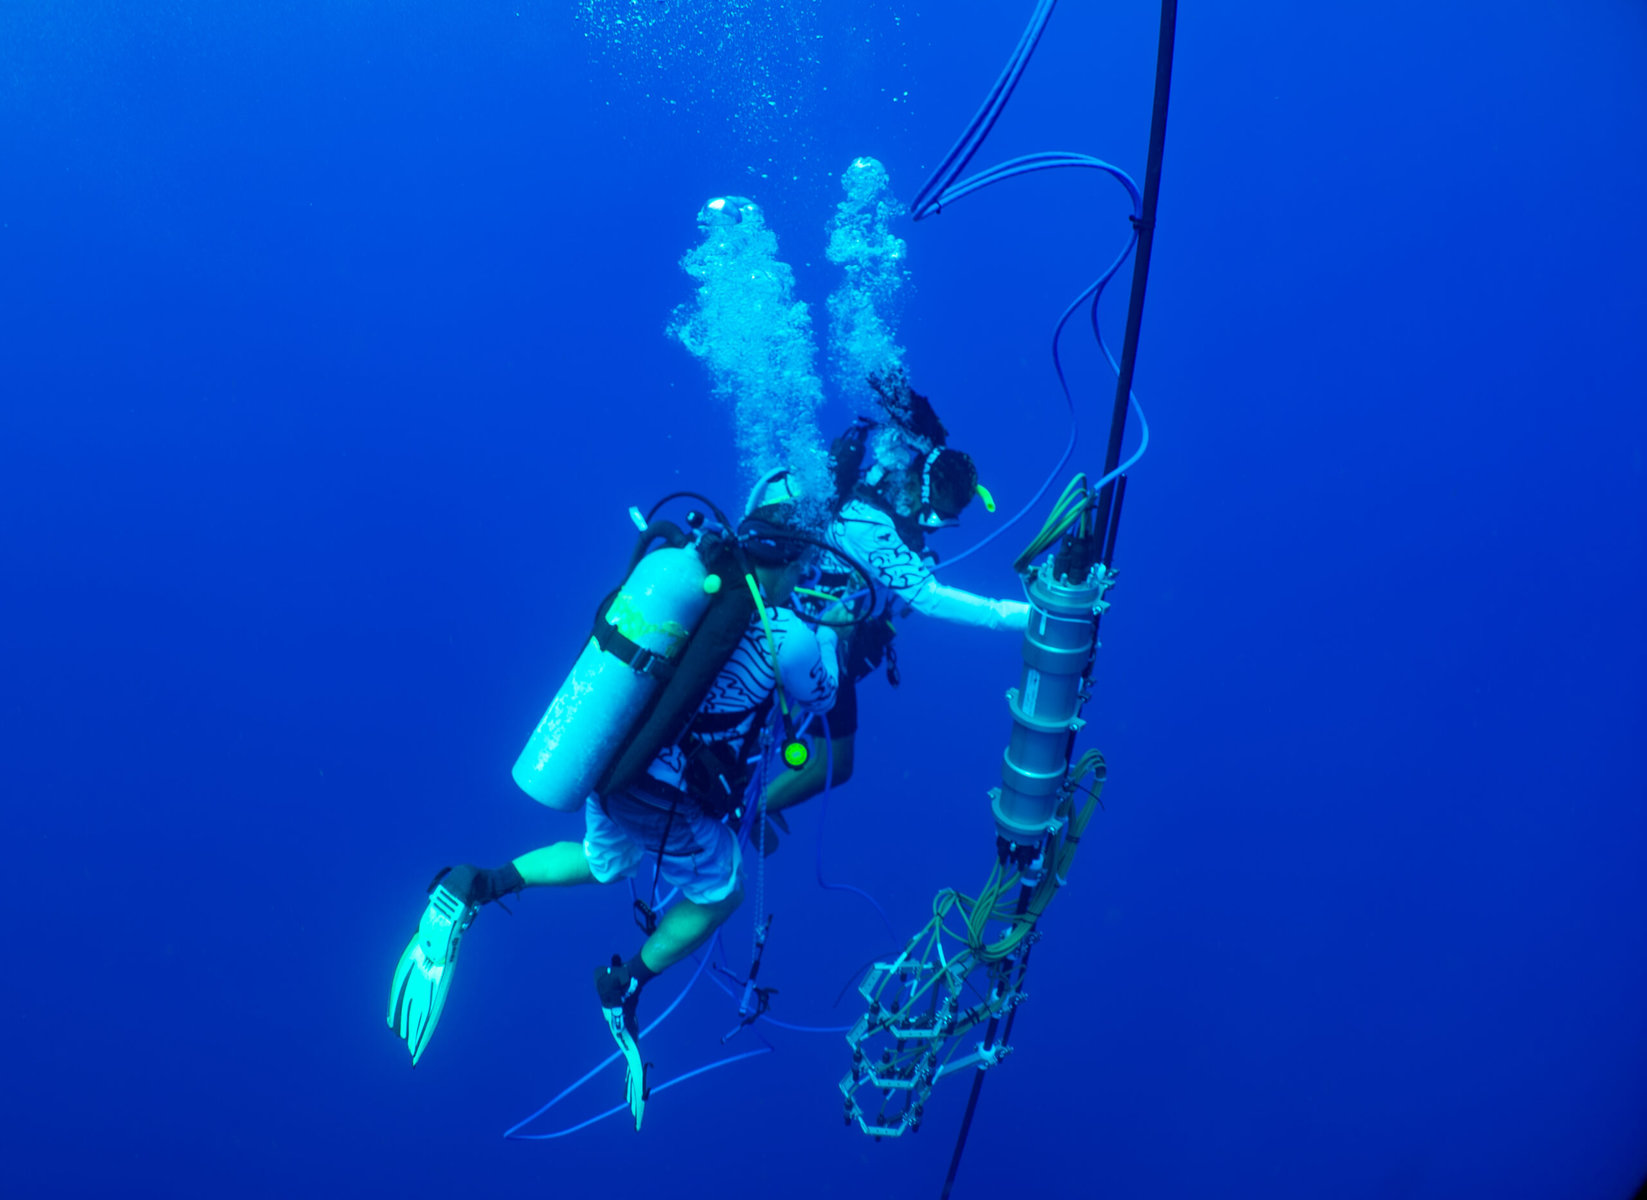 Scientists diving with whale recording unit.